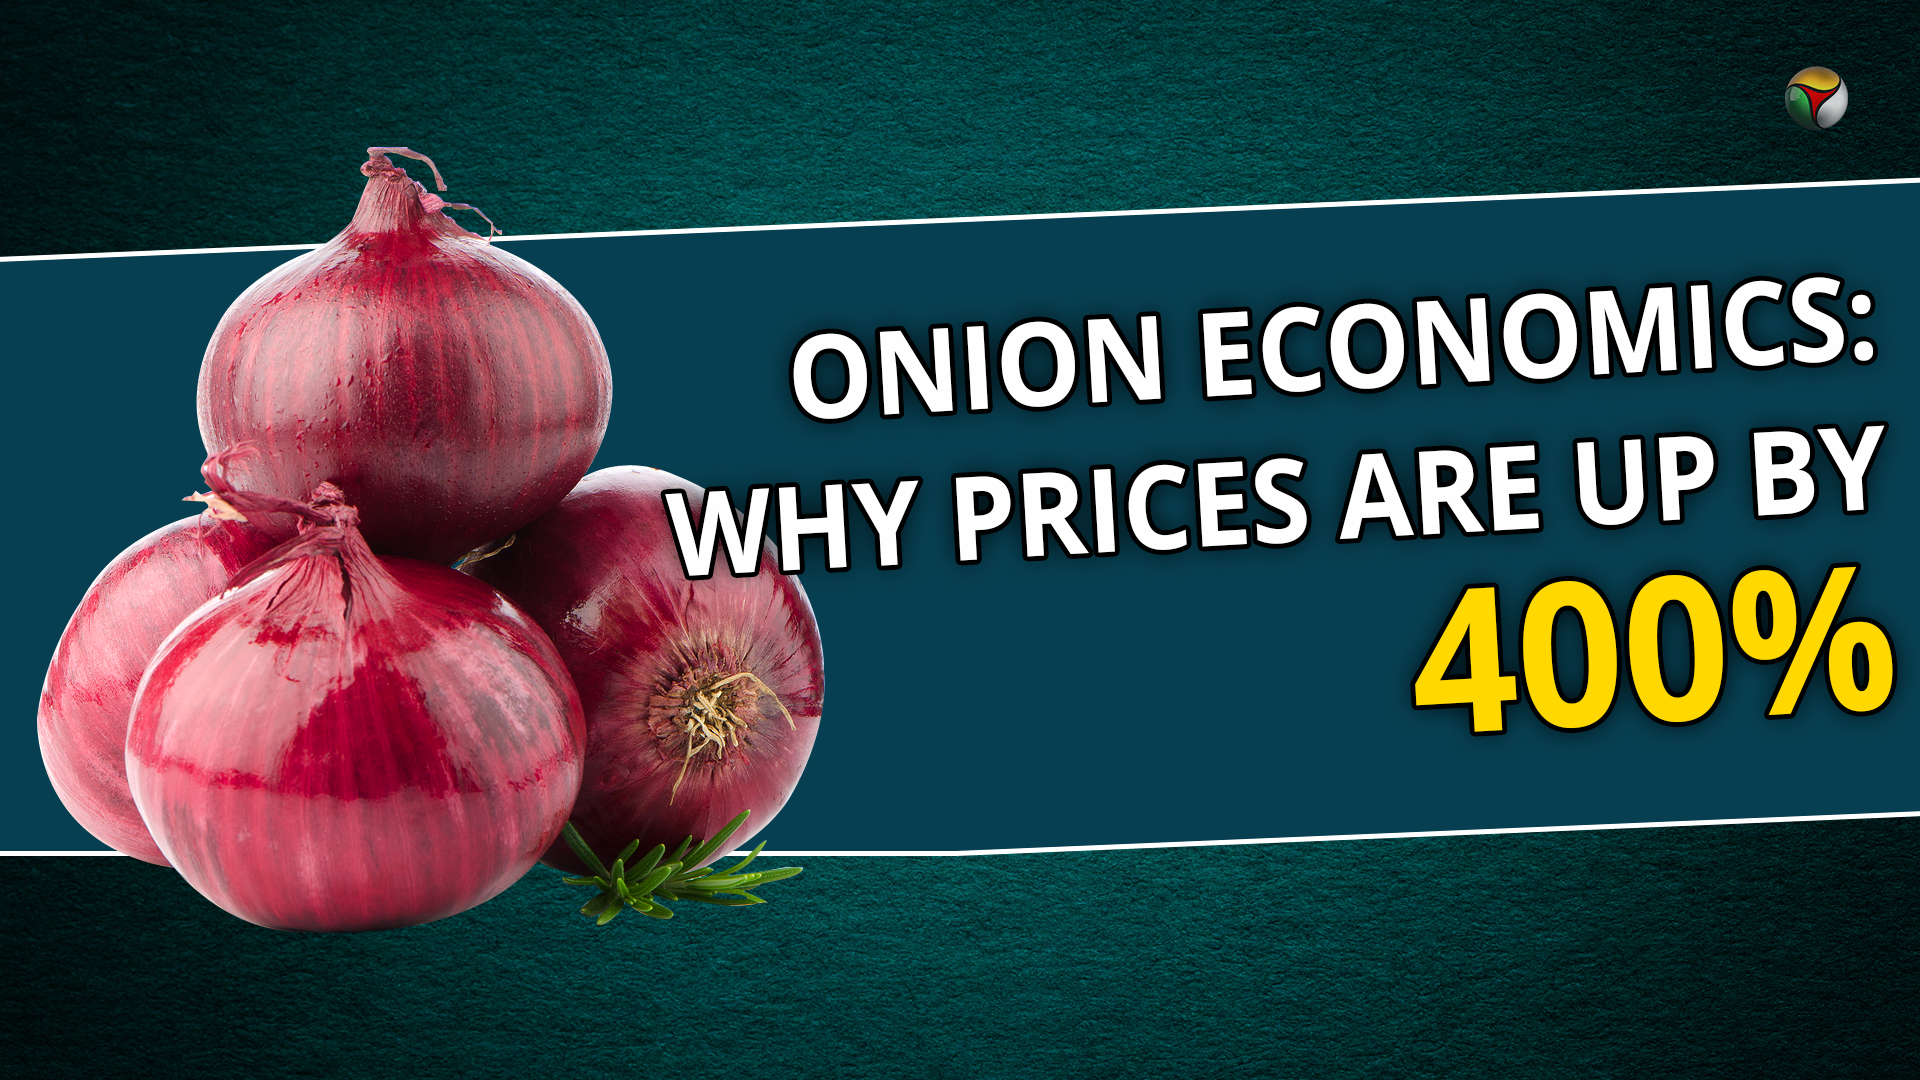 Onion economics: Why prices are up by 400%